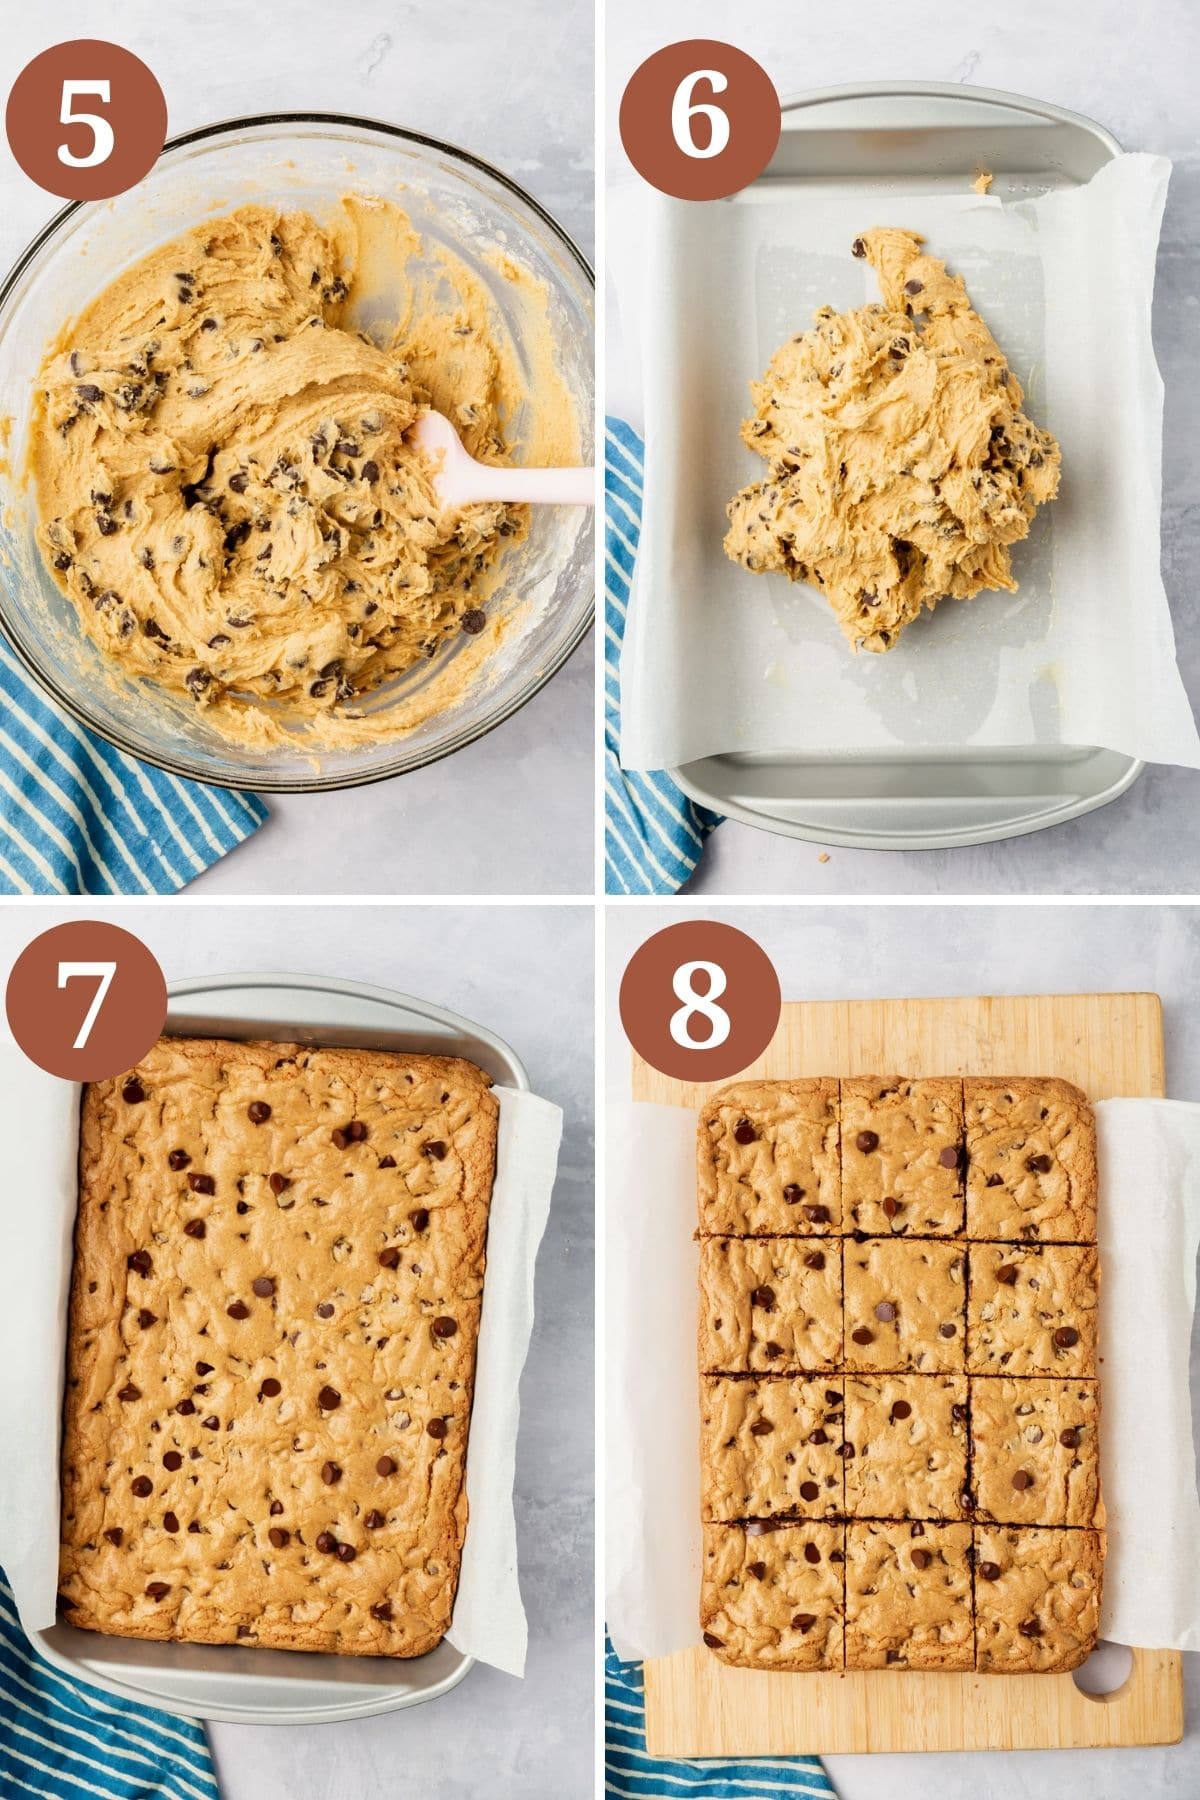 Steps 5-8 for making gluten-free chocolate chip cookie bars.